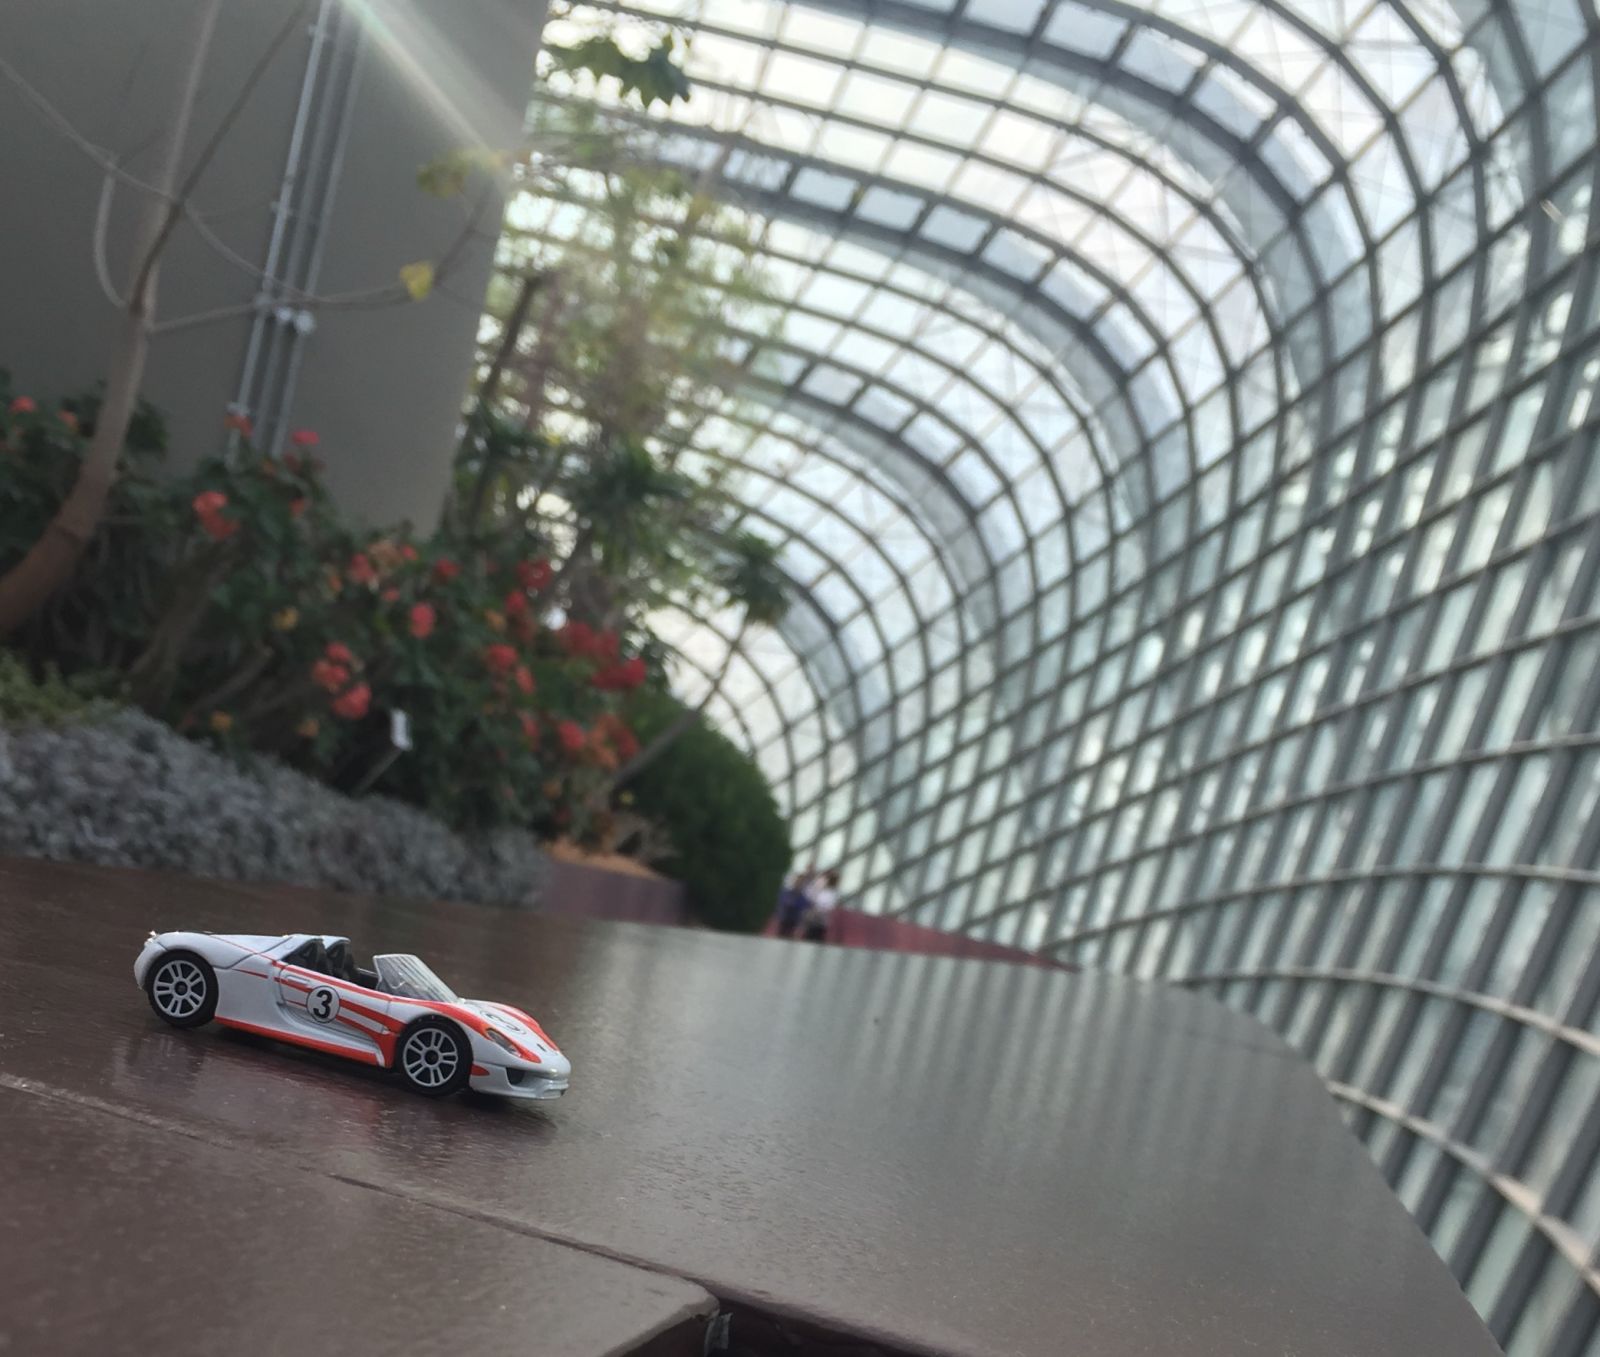 Illustration for article titled Teutonic Tuesday: Porsche 918 Spyder Weissach Package visits Gardens By the Bay